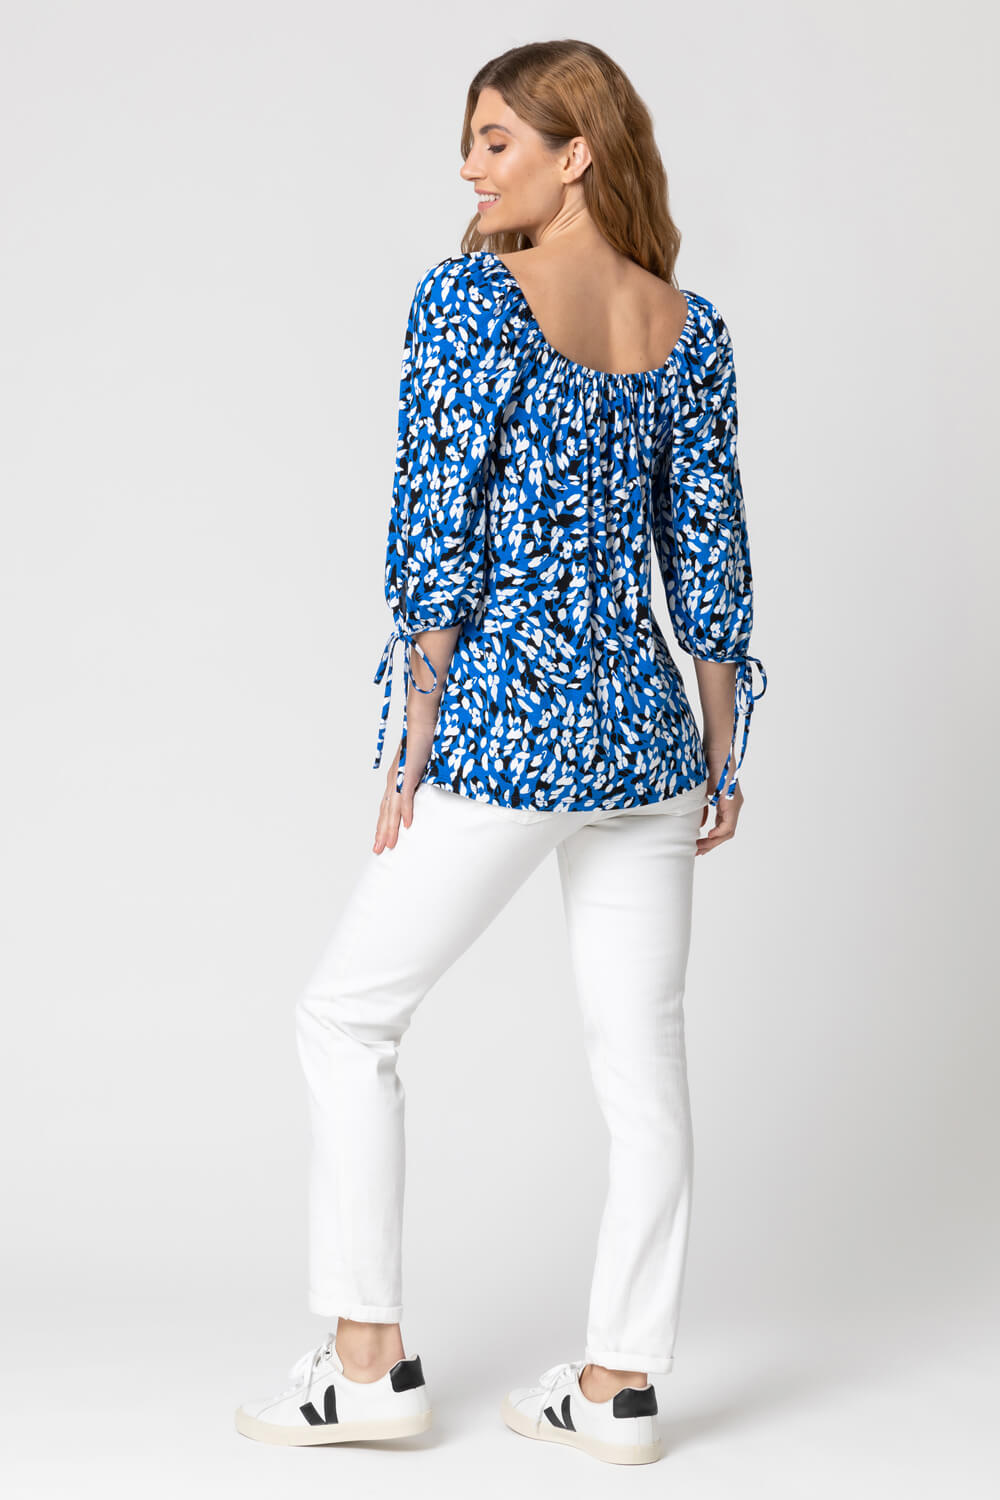 Royal Blue Abstract Spot Print Square Neck Top, Image 2 of 4